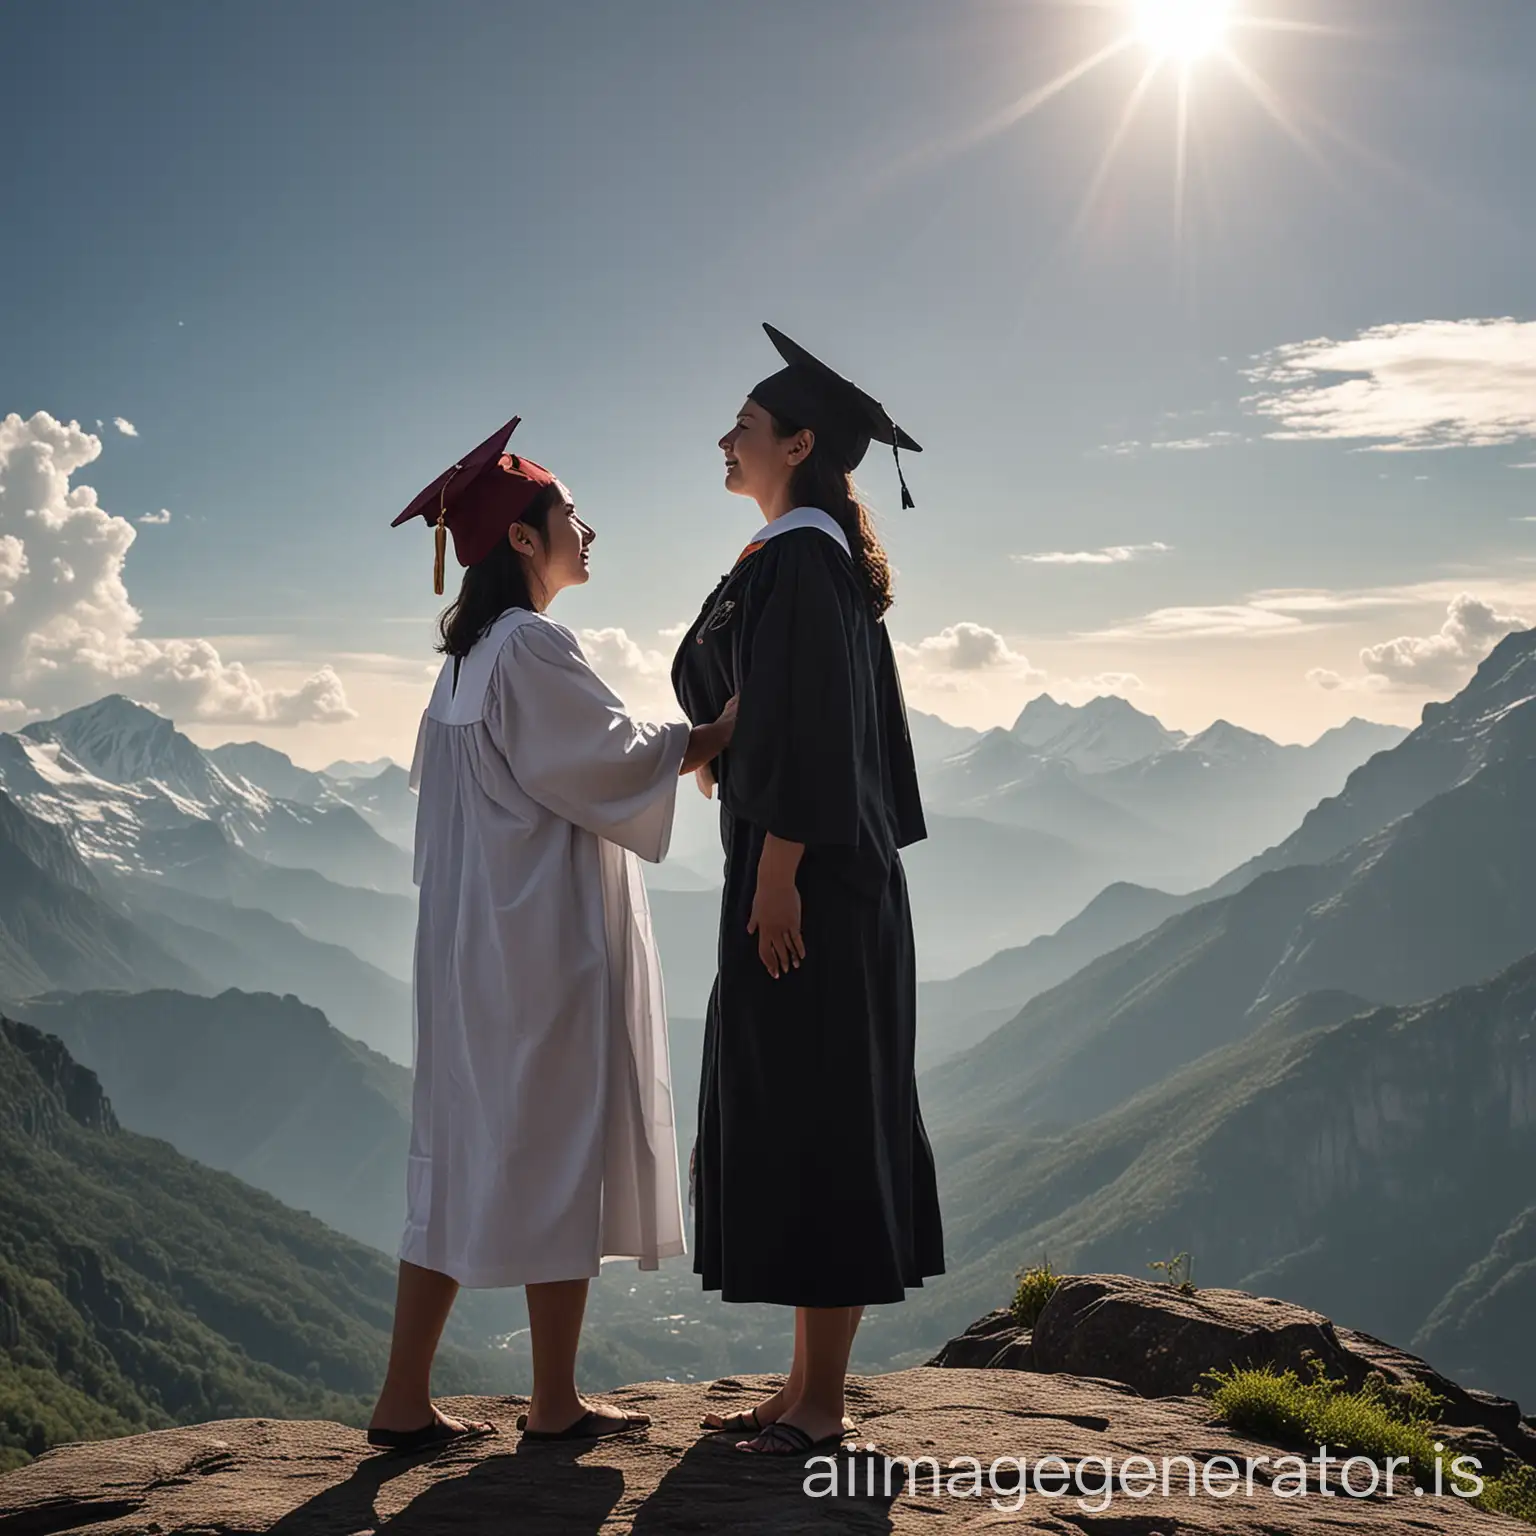 Proud-Student-Nurse-Graduation-Ceremony-with-Emotional-Mother-Silhouette-in-Mountain-Setting